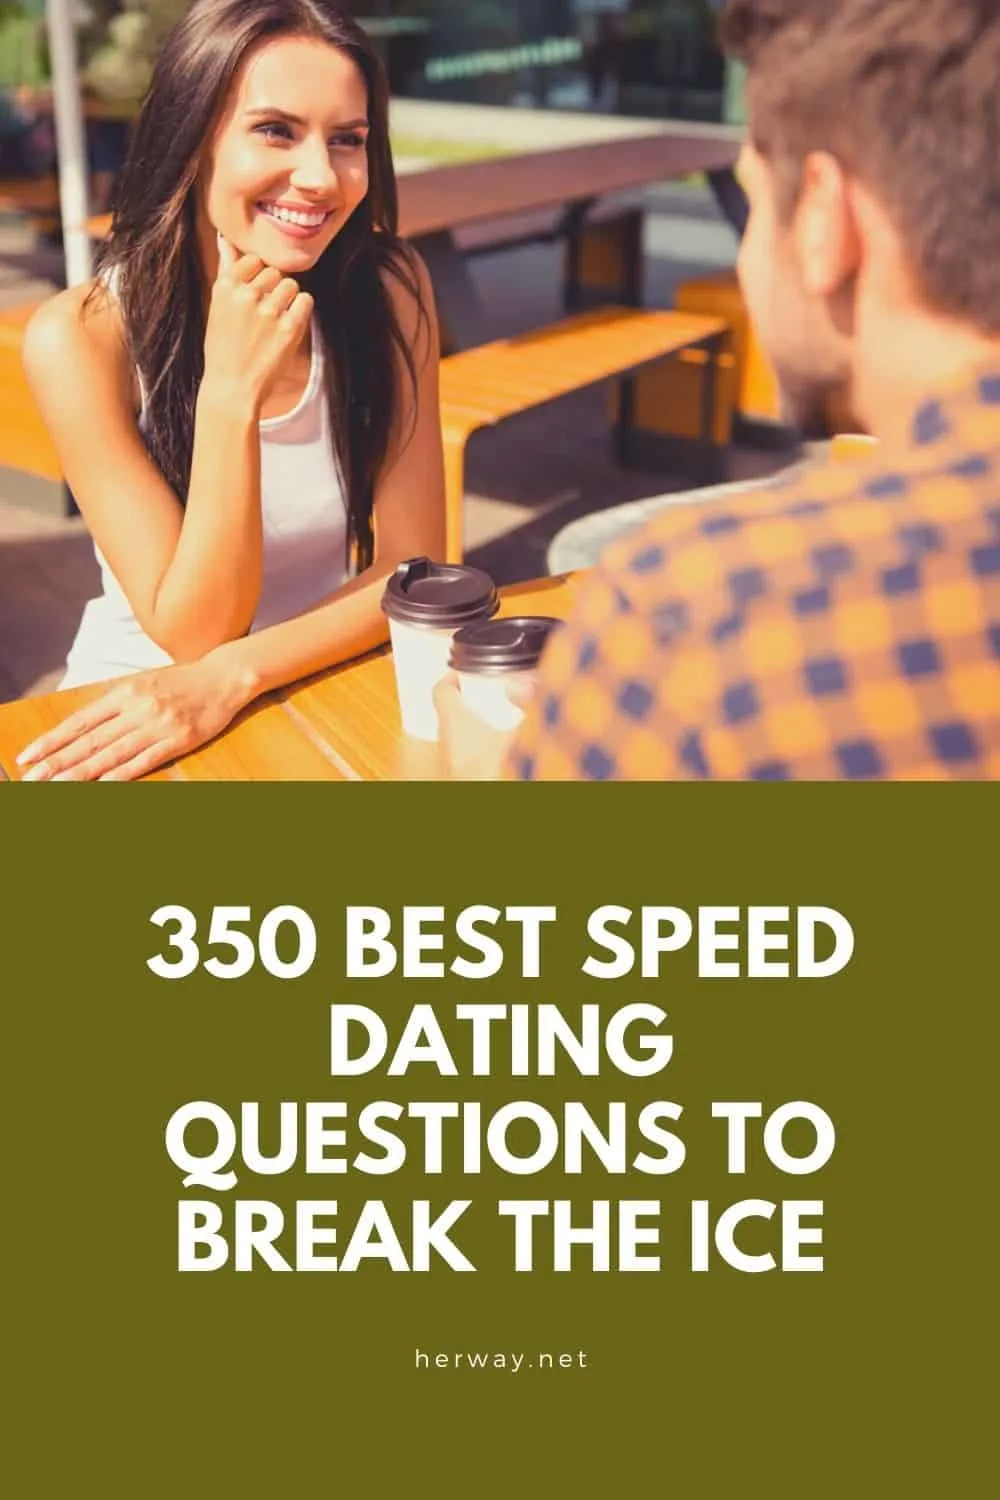 350 Best Speed Dating Questions To Break The Ice